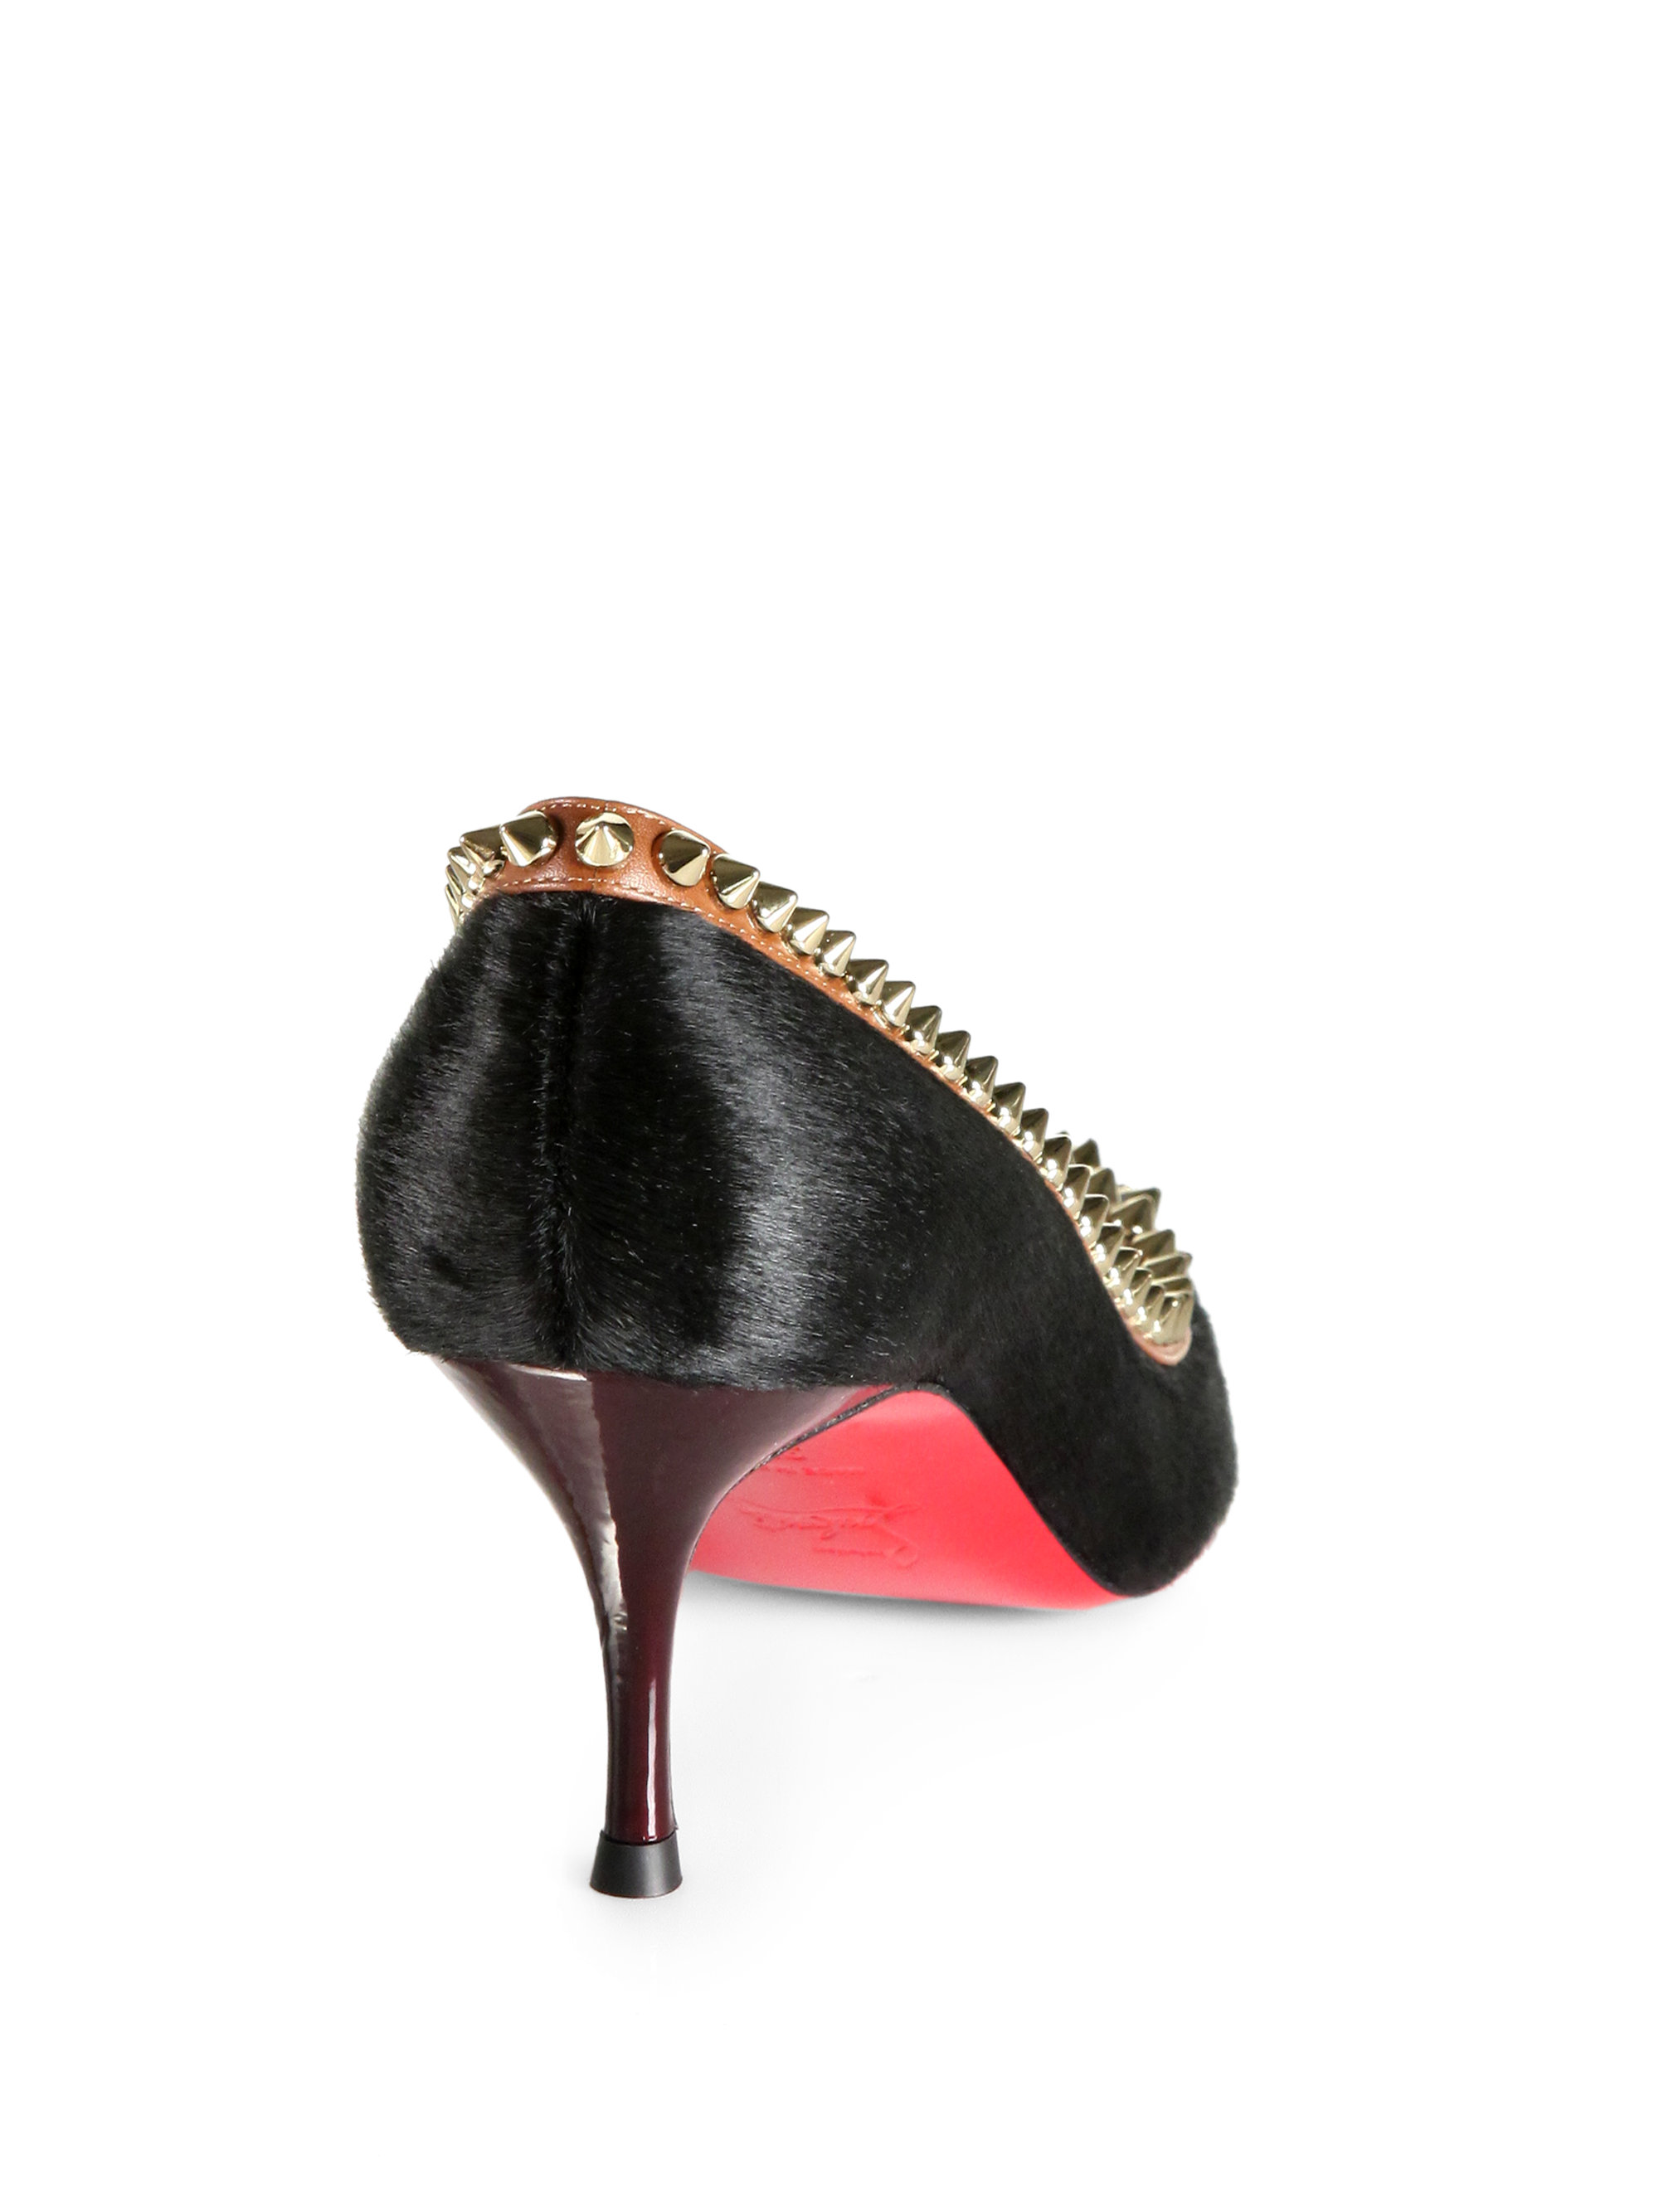 replica shoes men - Christian louboutin Malabar Hill Spiked Pony Hair Leather Pumps in ...